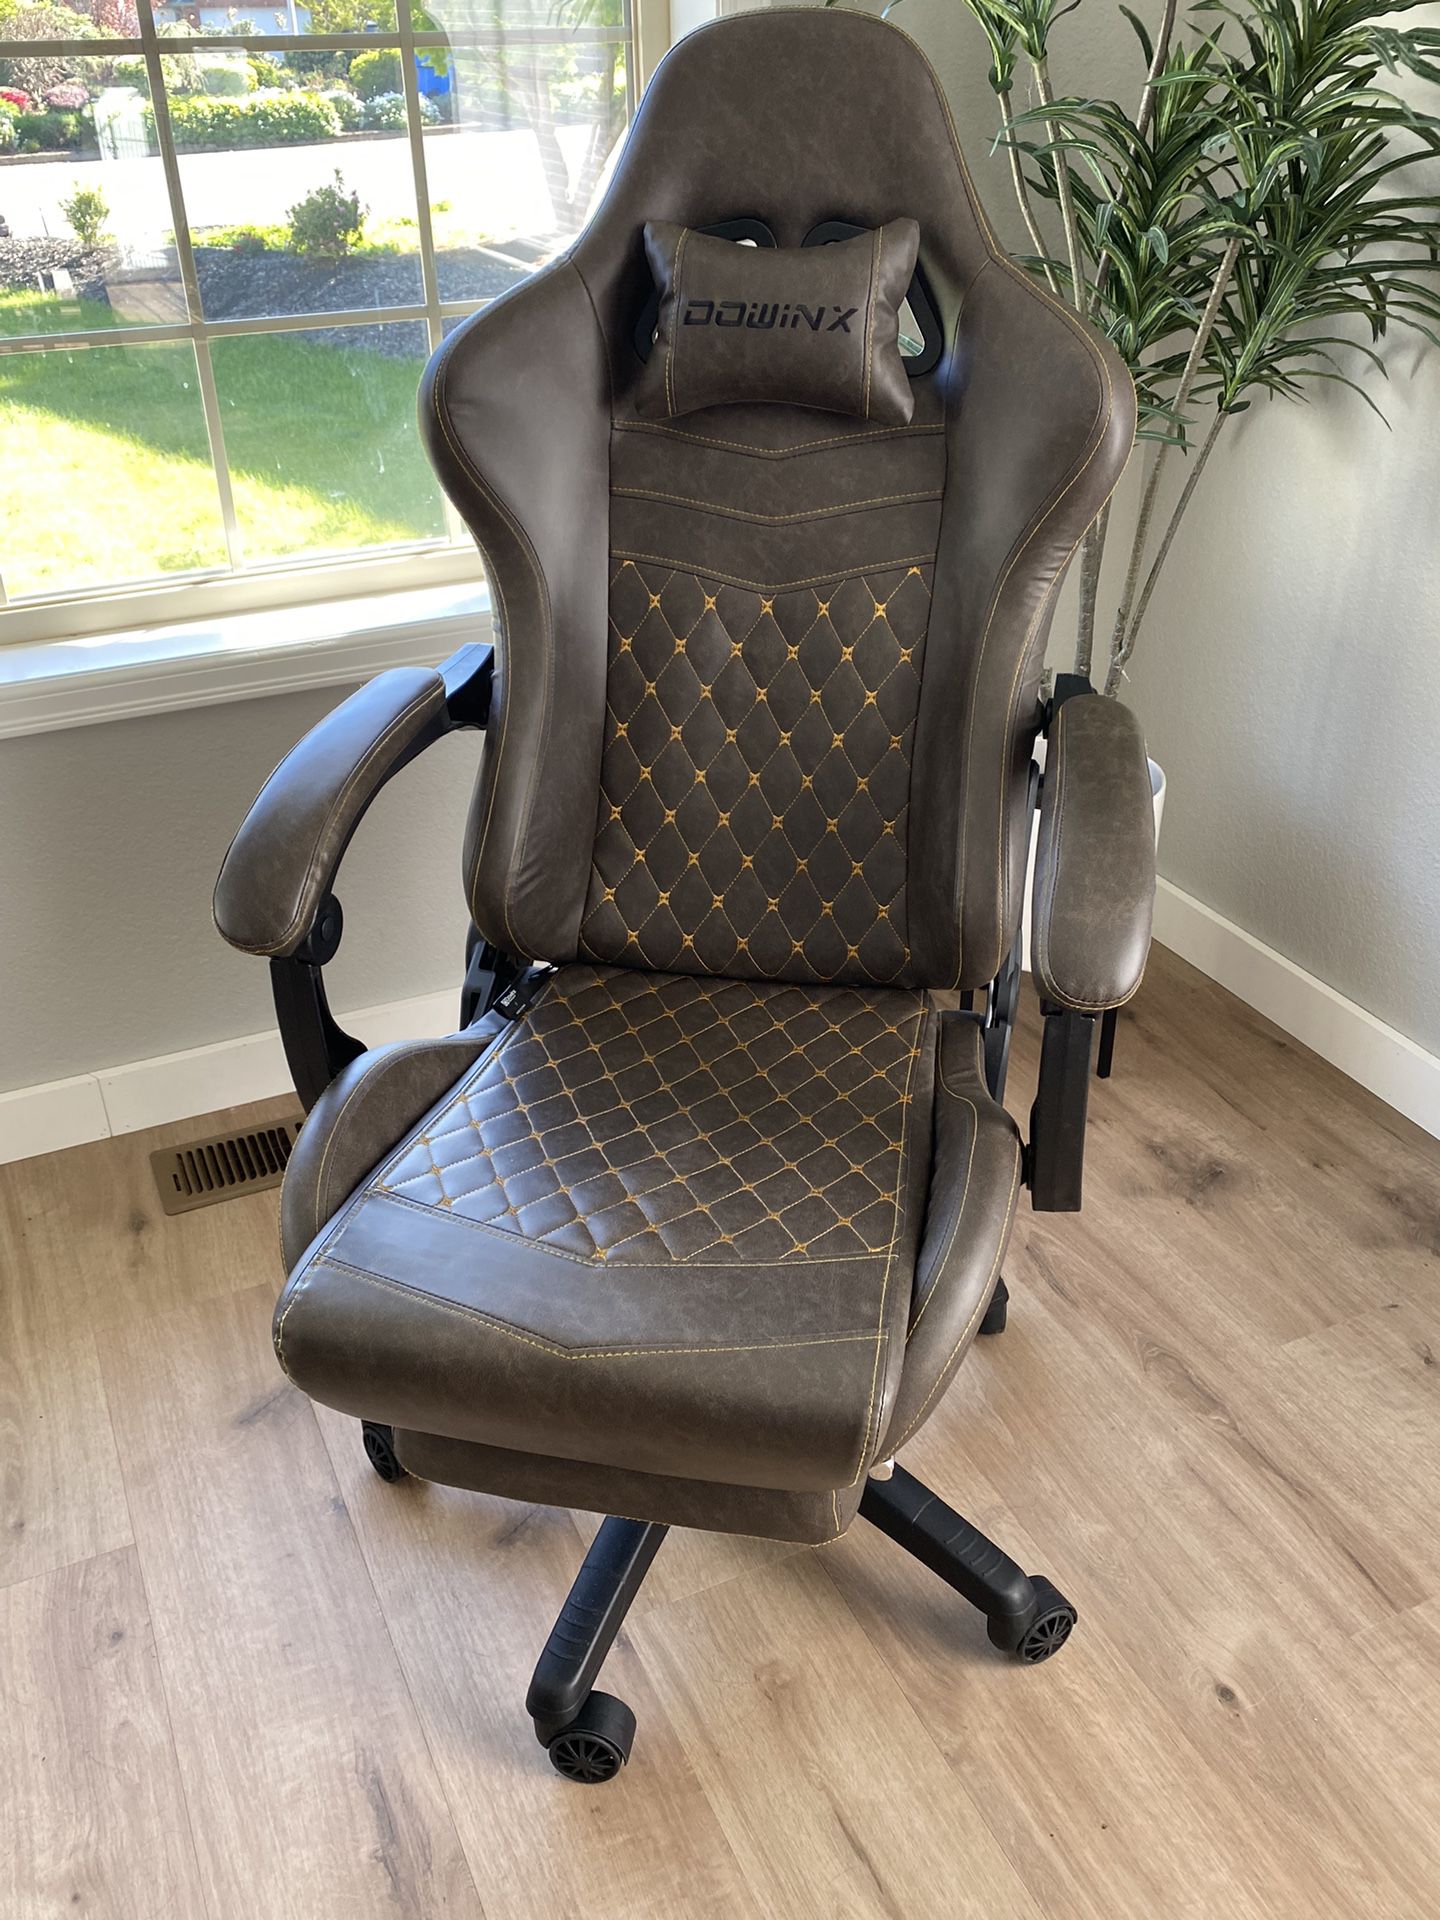 $50  OBO        Gaming Chair, Like Leather, Reclining, Foot Rest